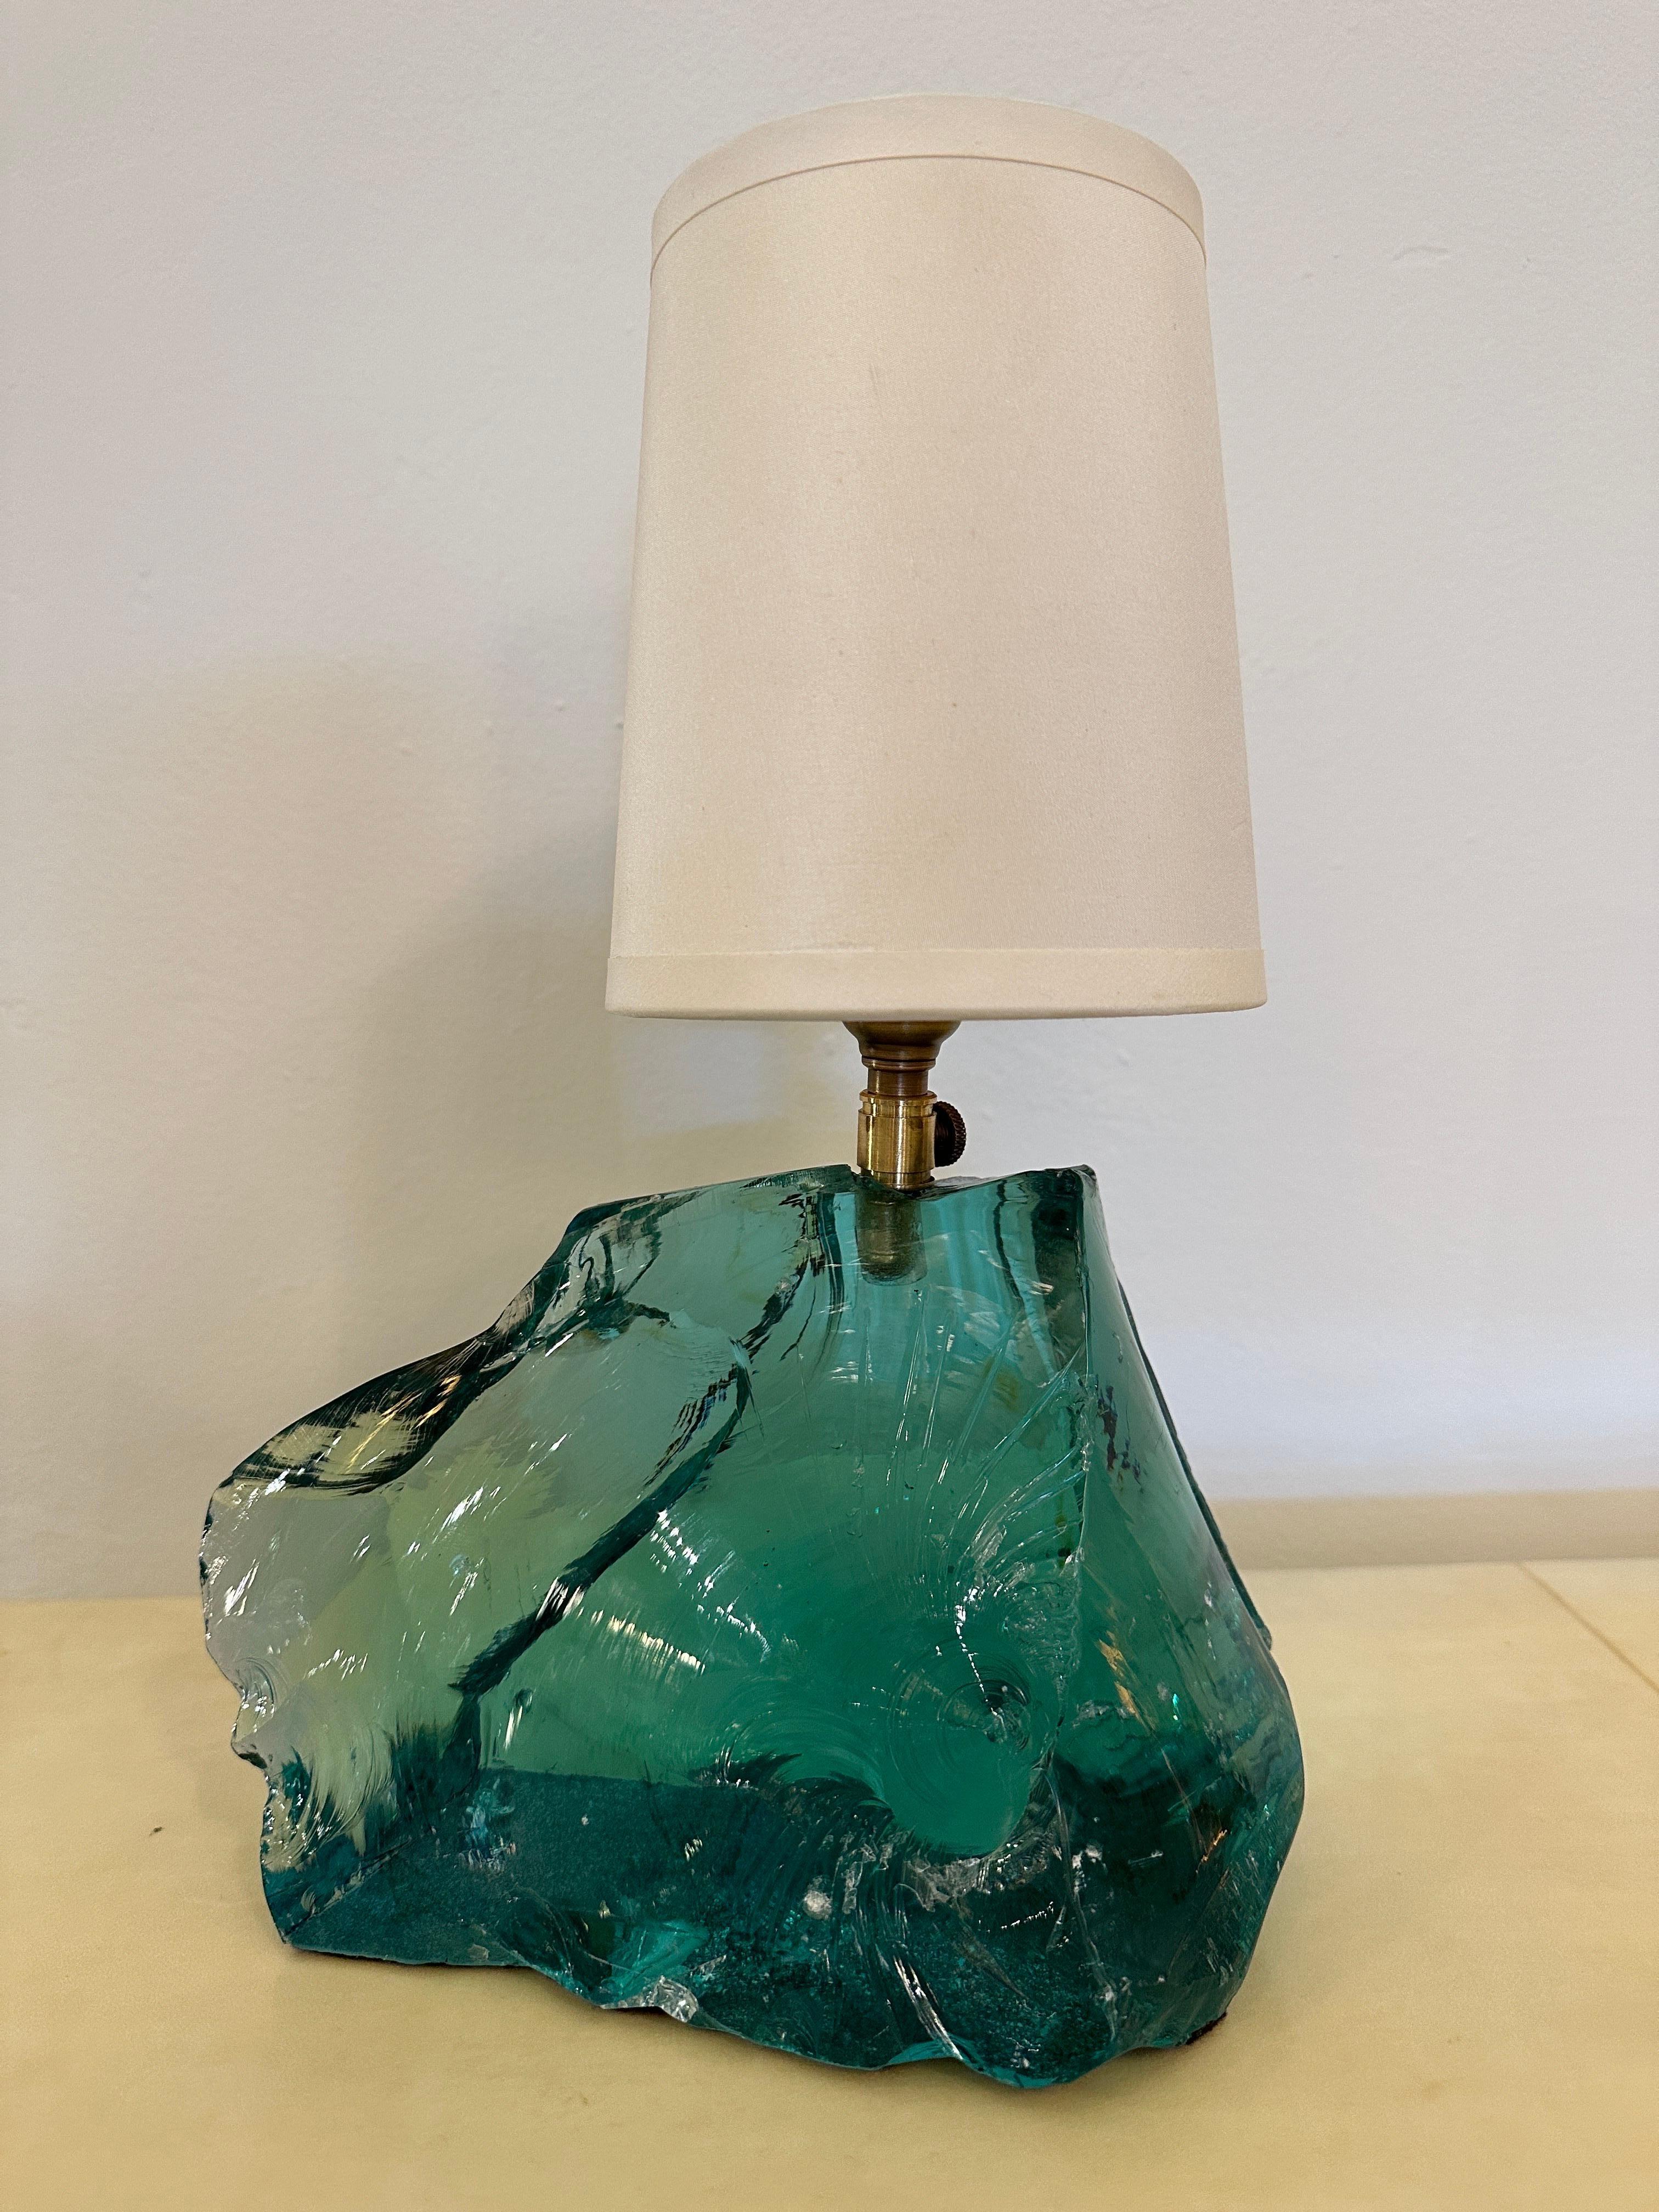 Pair of Aqua Green Slag Glass Table Lamps In Good Condition For Sale In East Hampton, NY